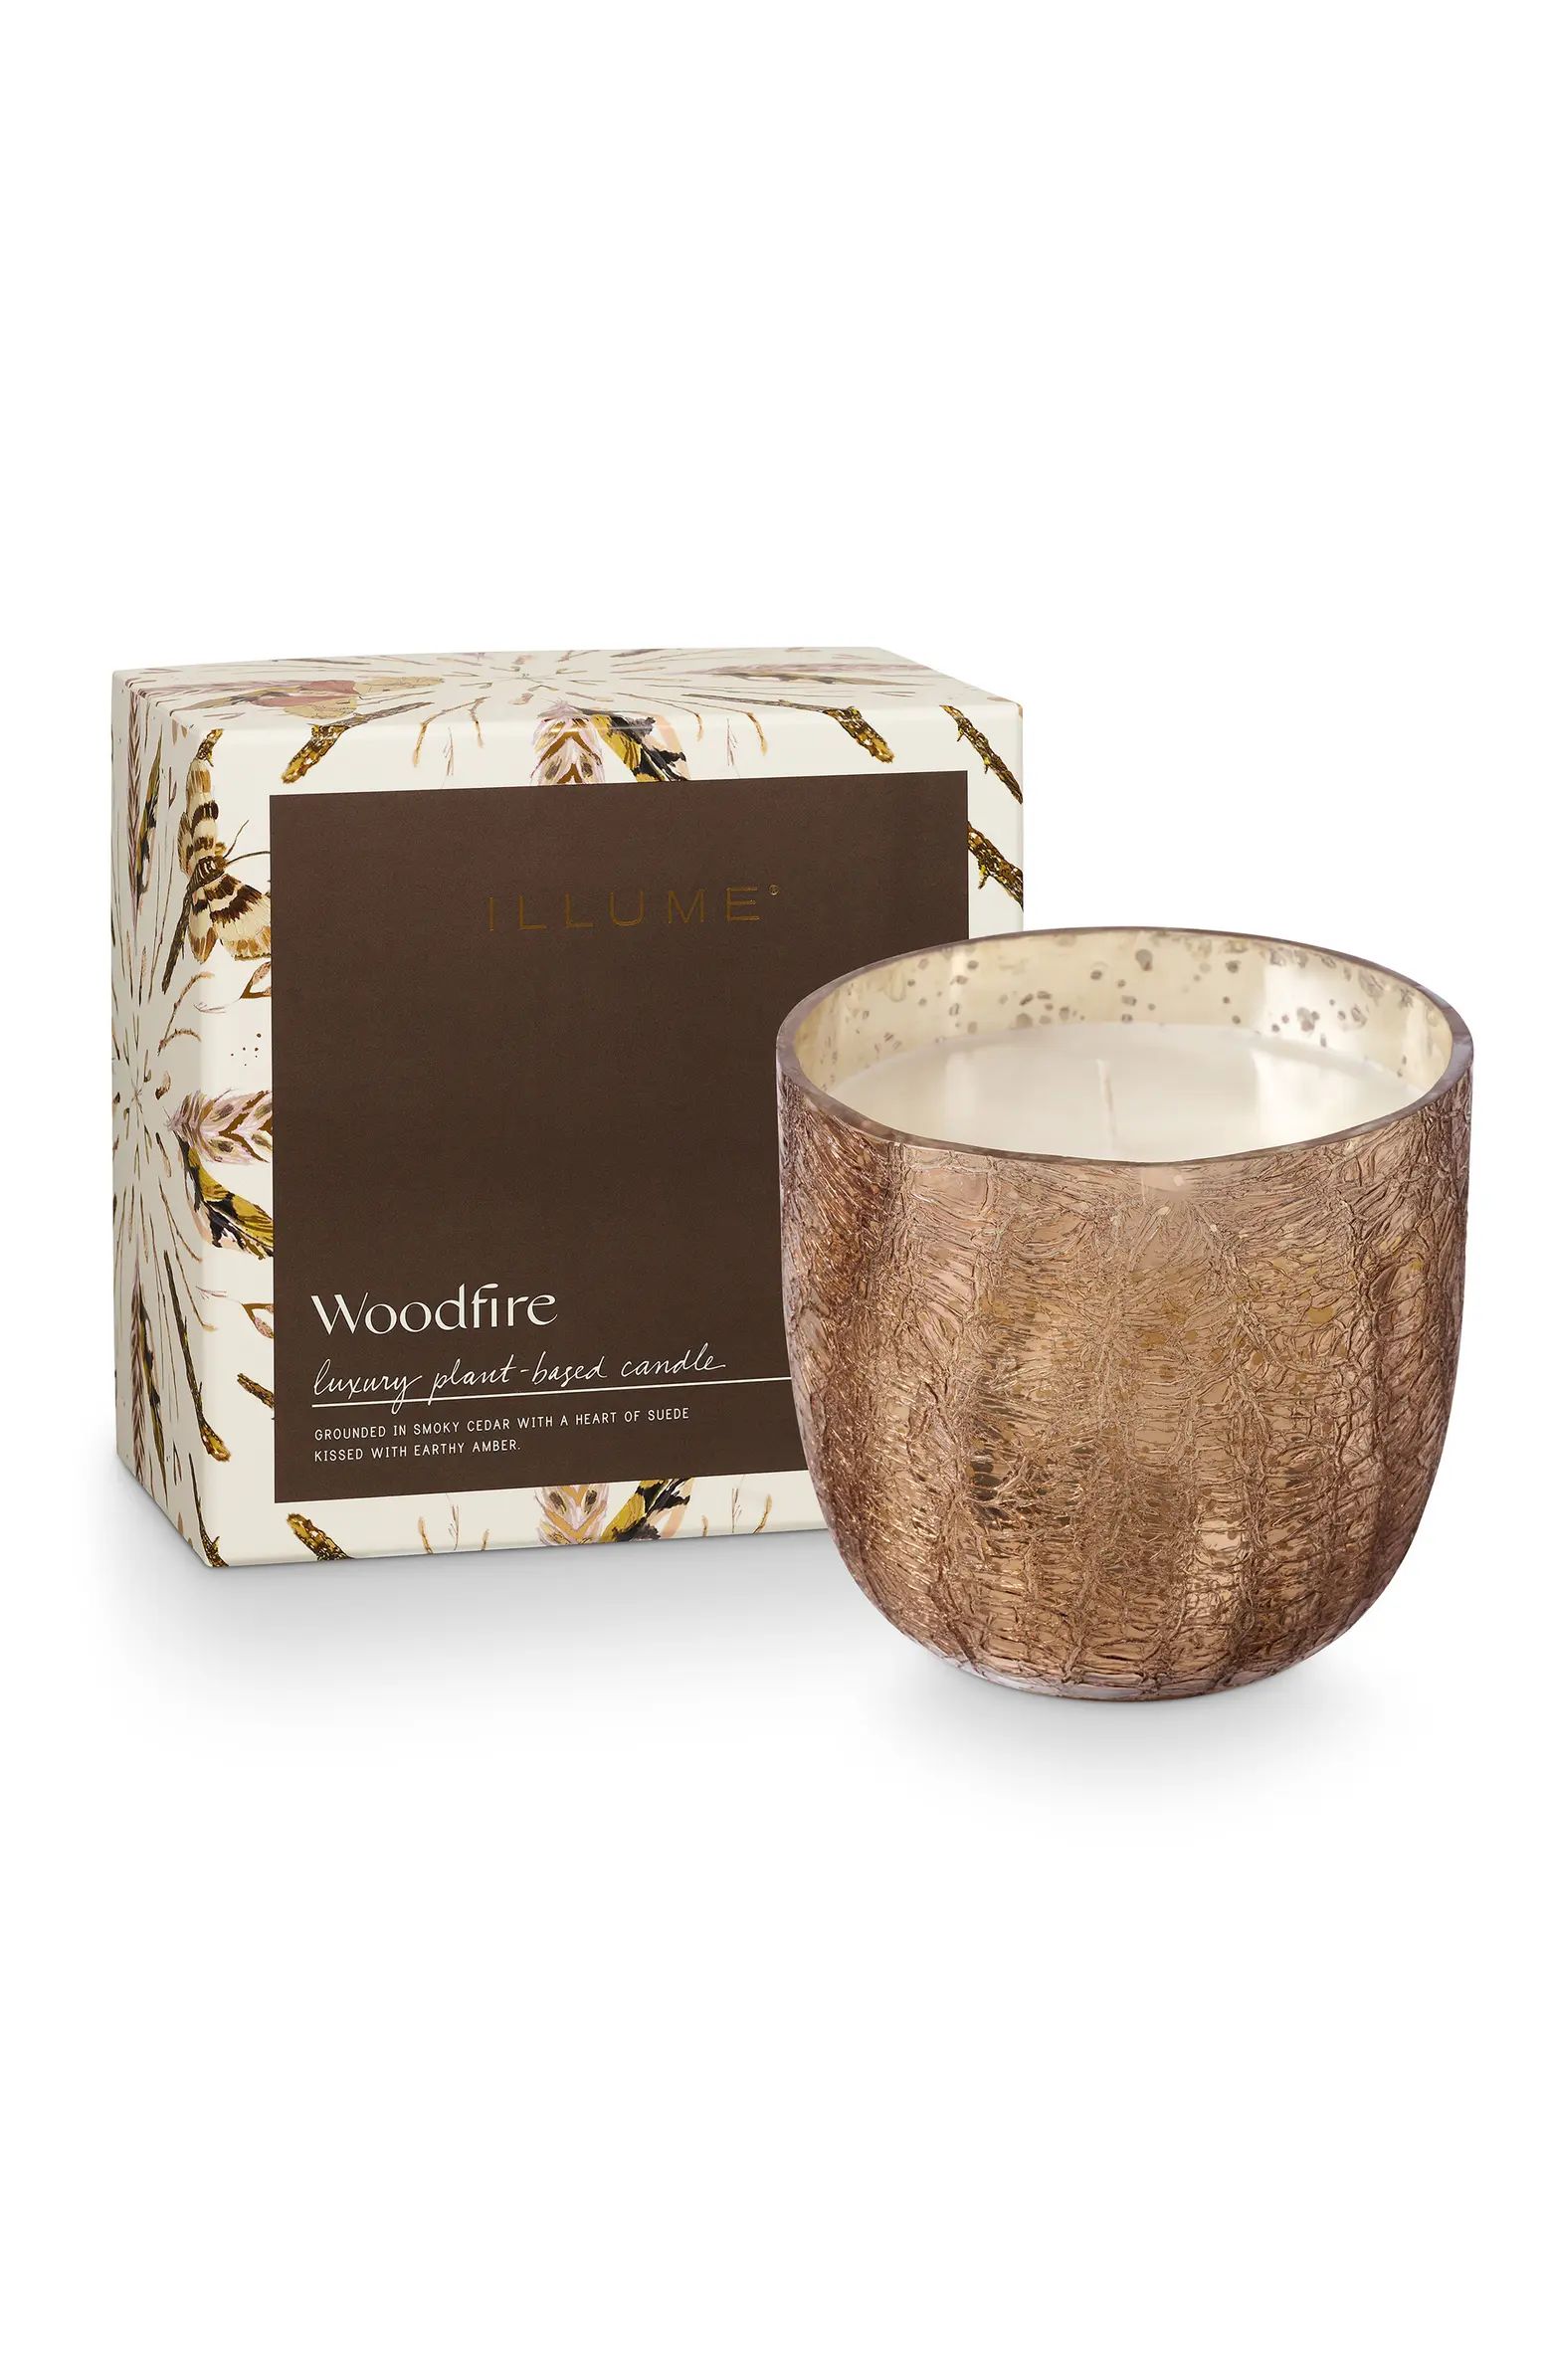 ILLUME® Woodfire Mercury Glass Candle | Nordstrom | Nordstrom